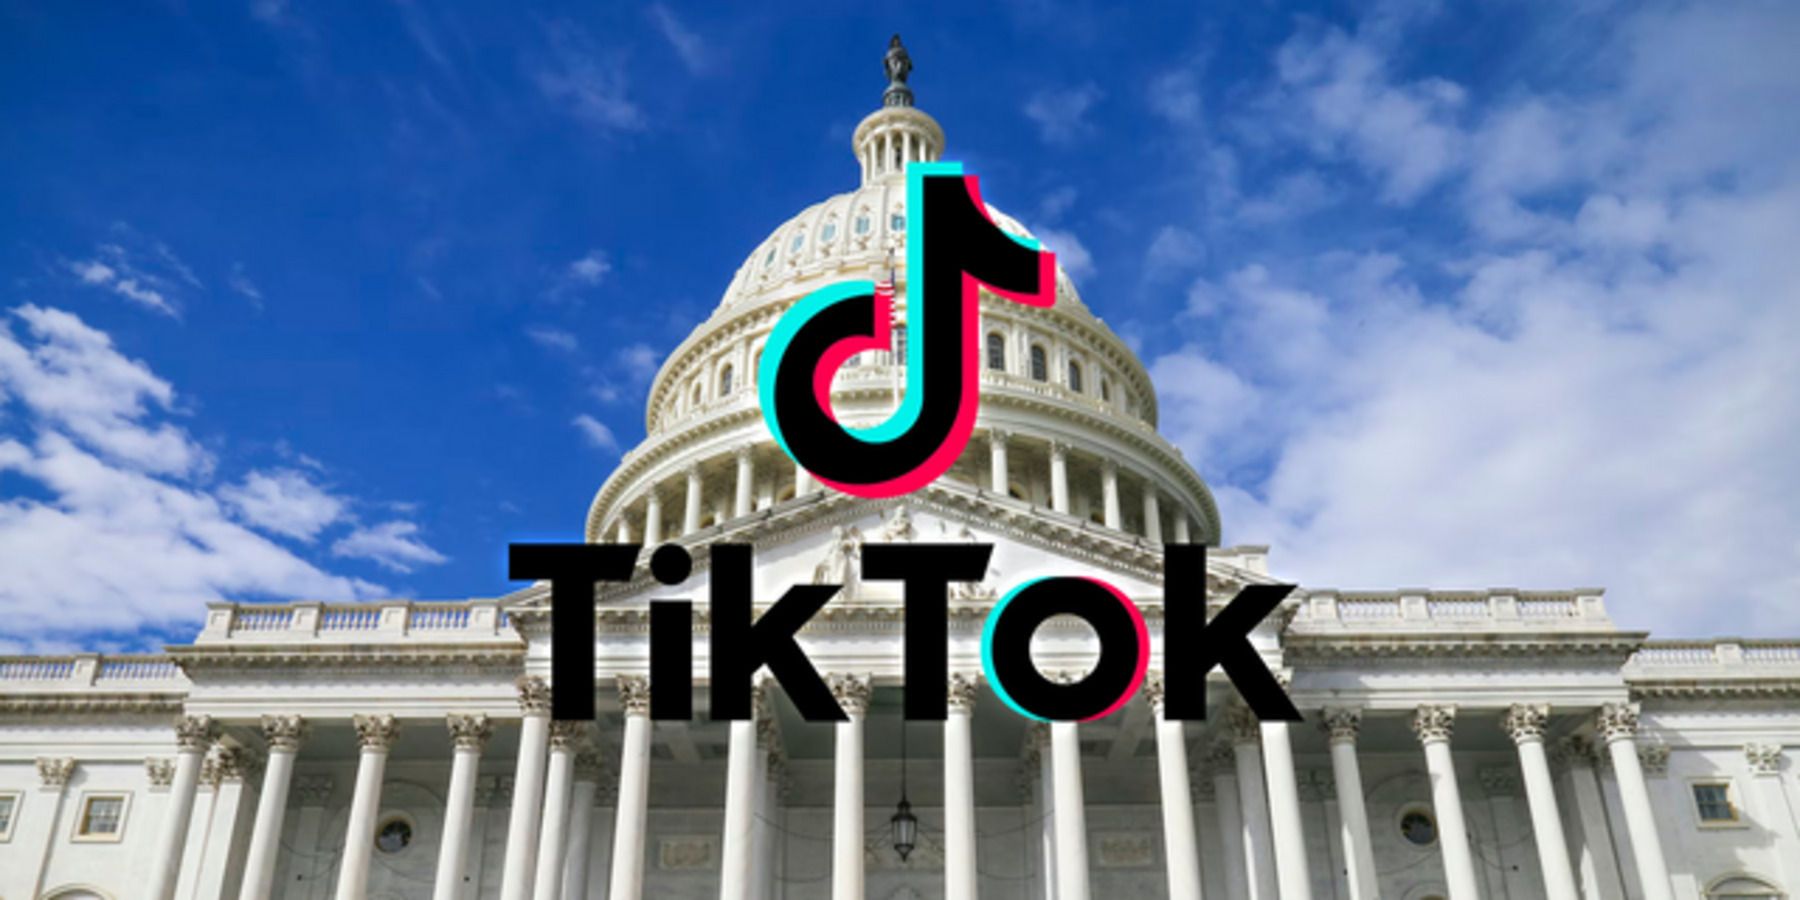 TikTok Responds to US Politician Proposals to Ban the
App